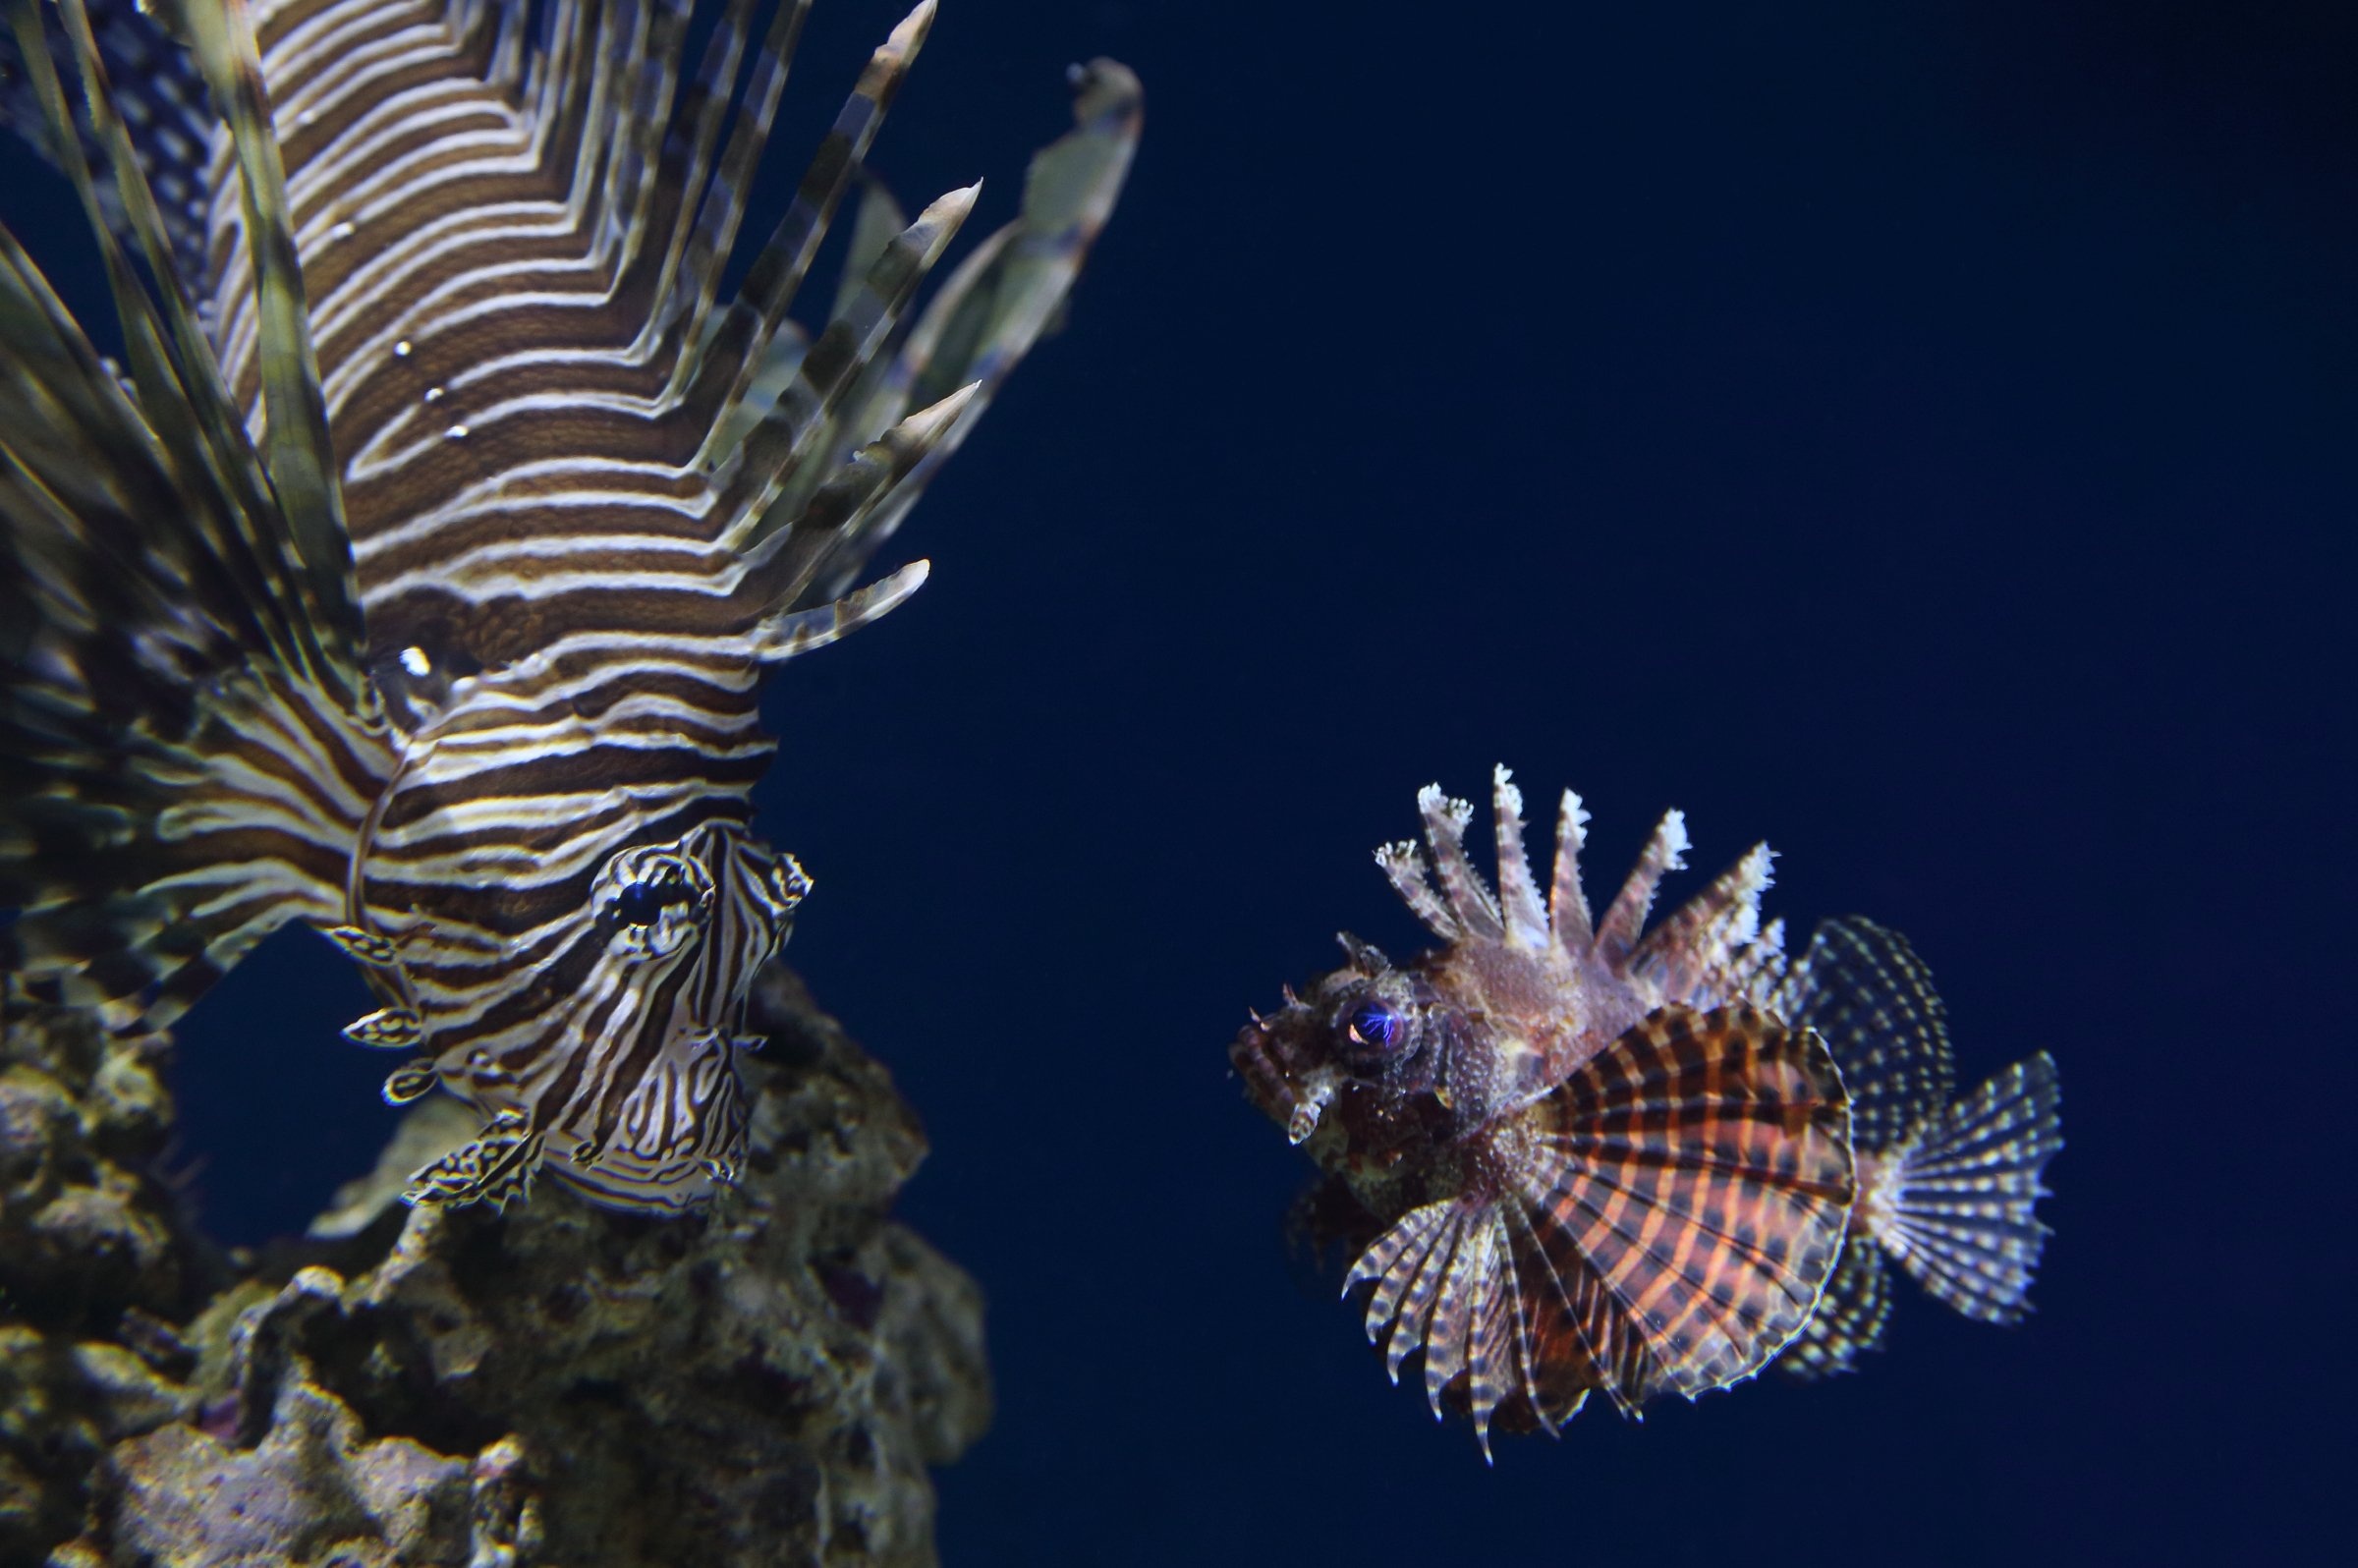 Lionfish Wallpapers - Top Free Lionfish Backgrounds 2400x1600